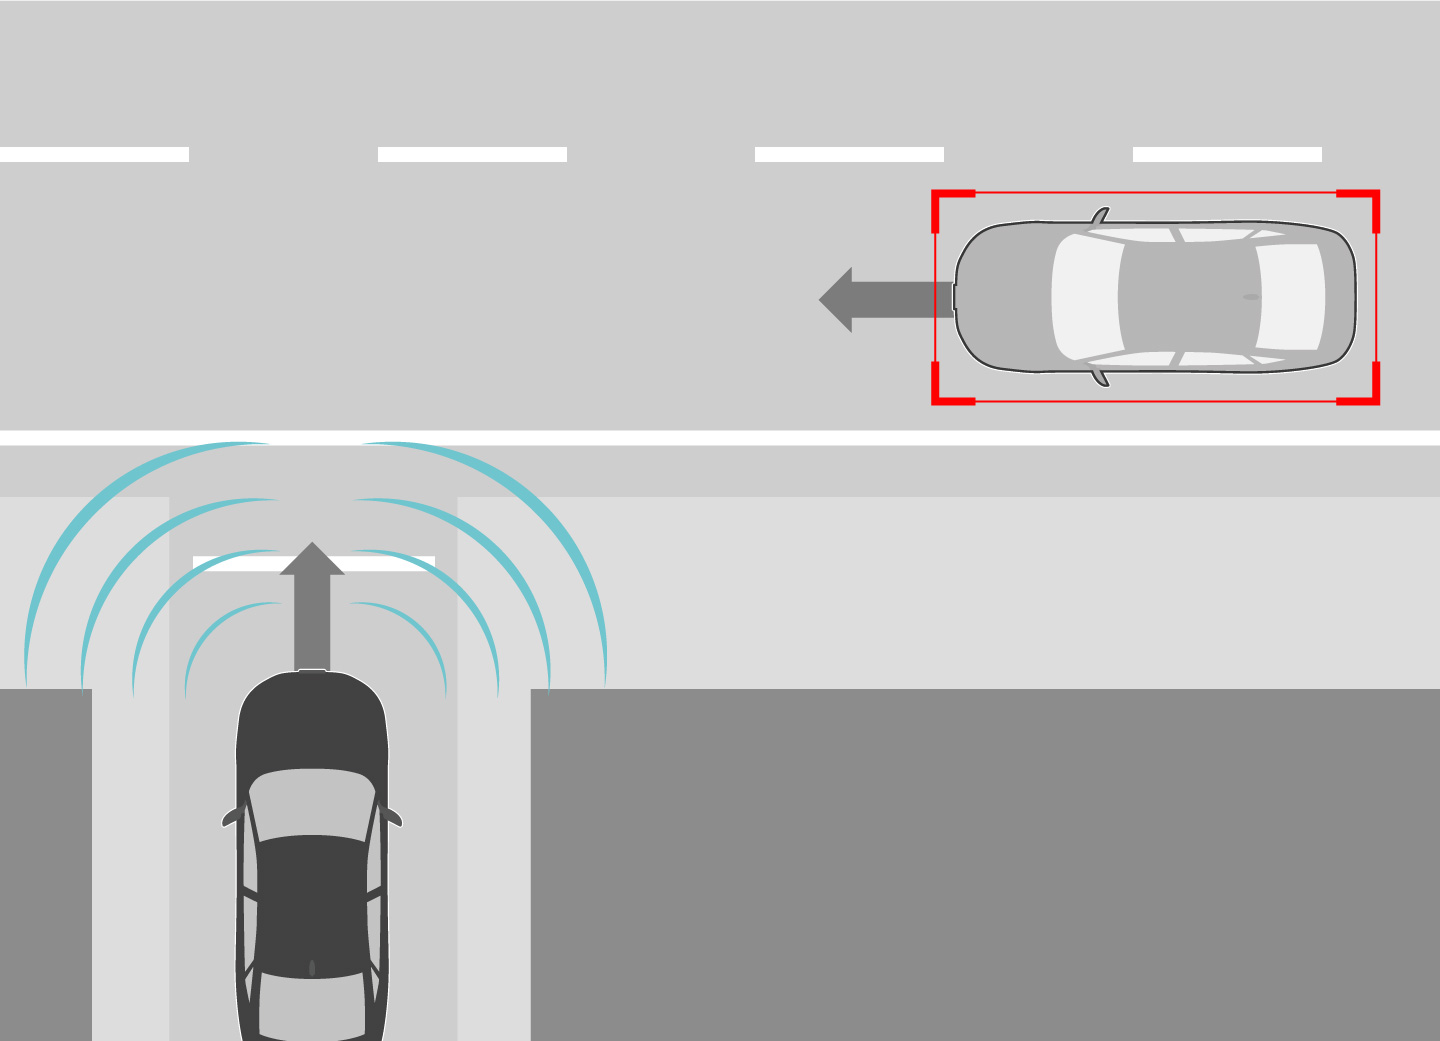 The system recognizes approaching cross traffic using the corner radars and predicts the risk of collision with the vehicle.